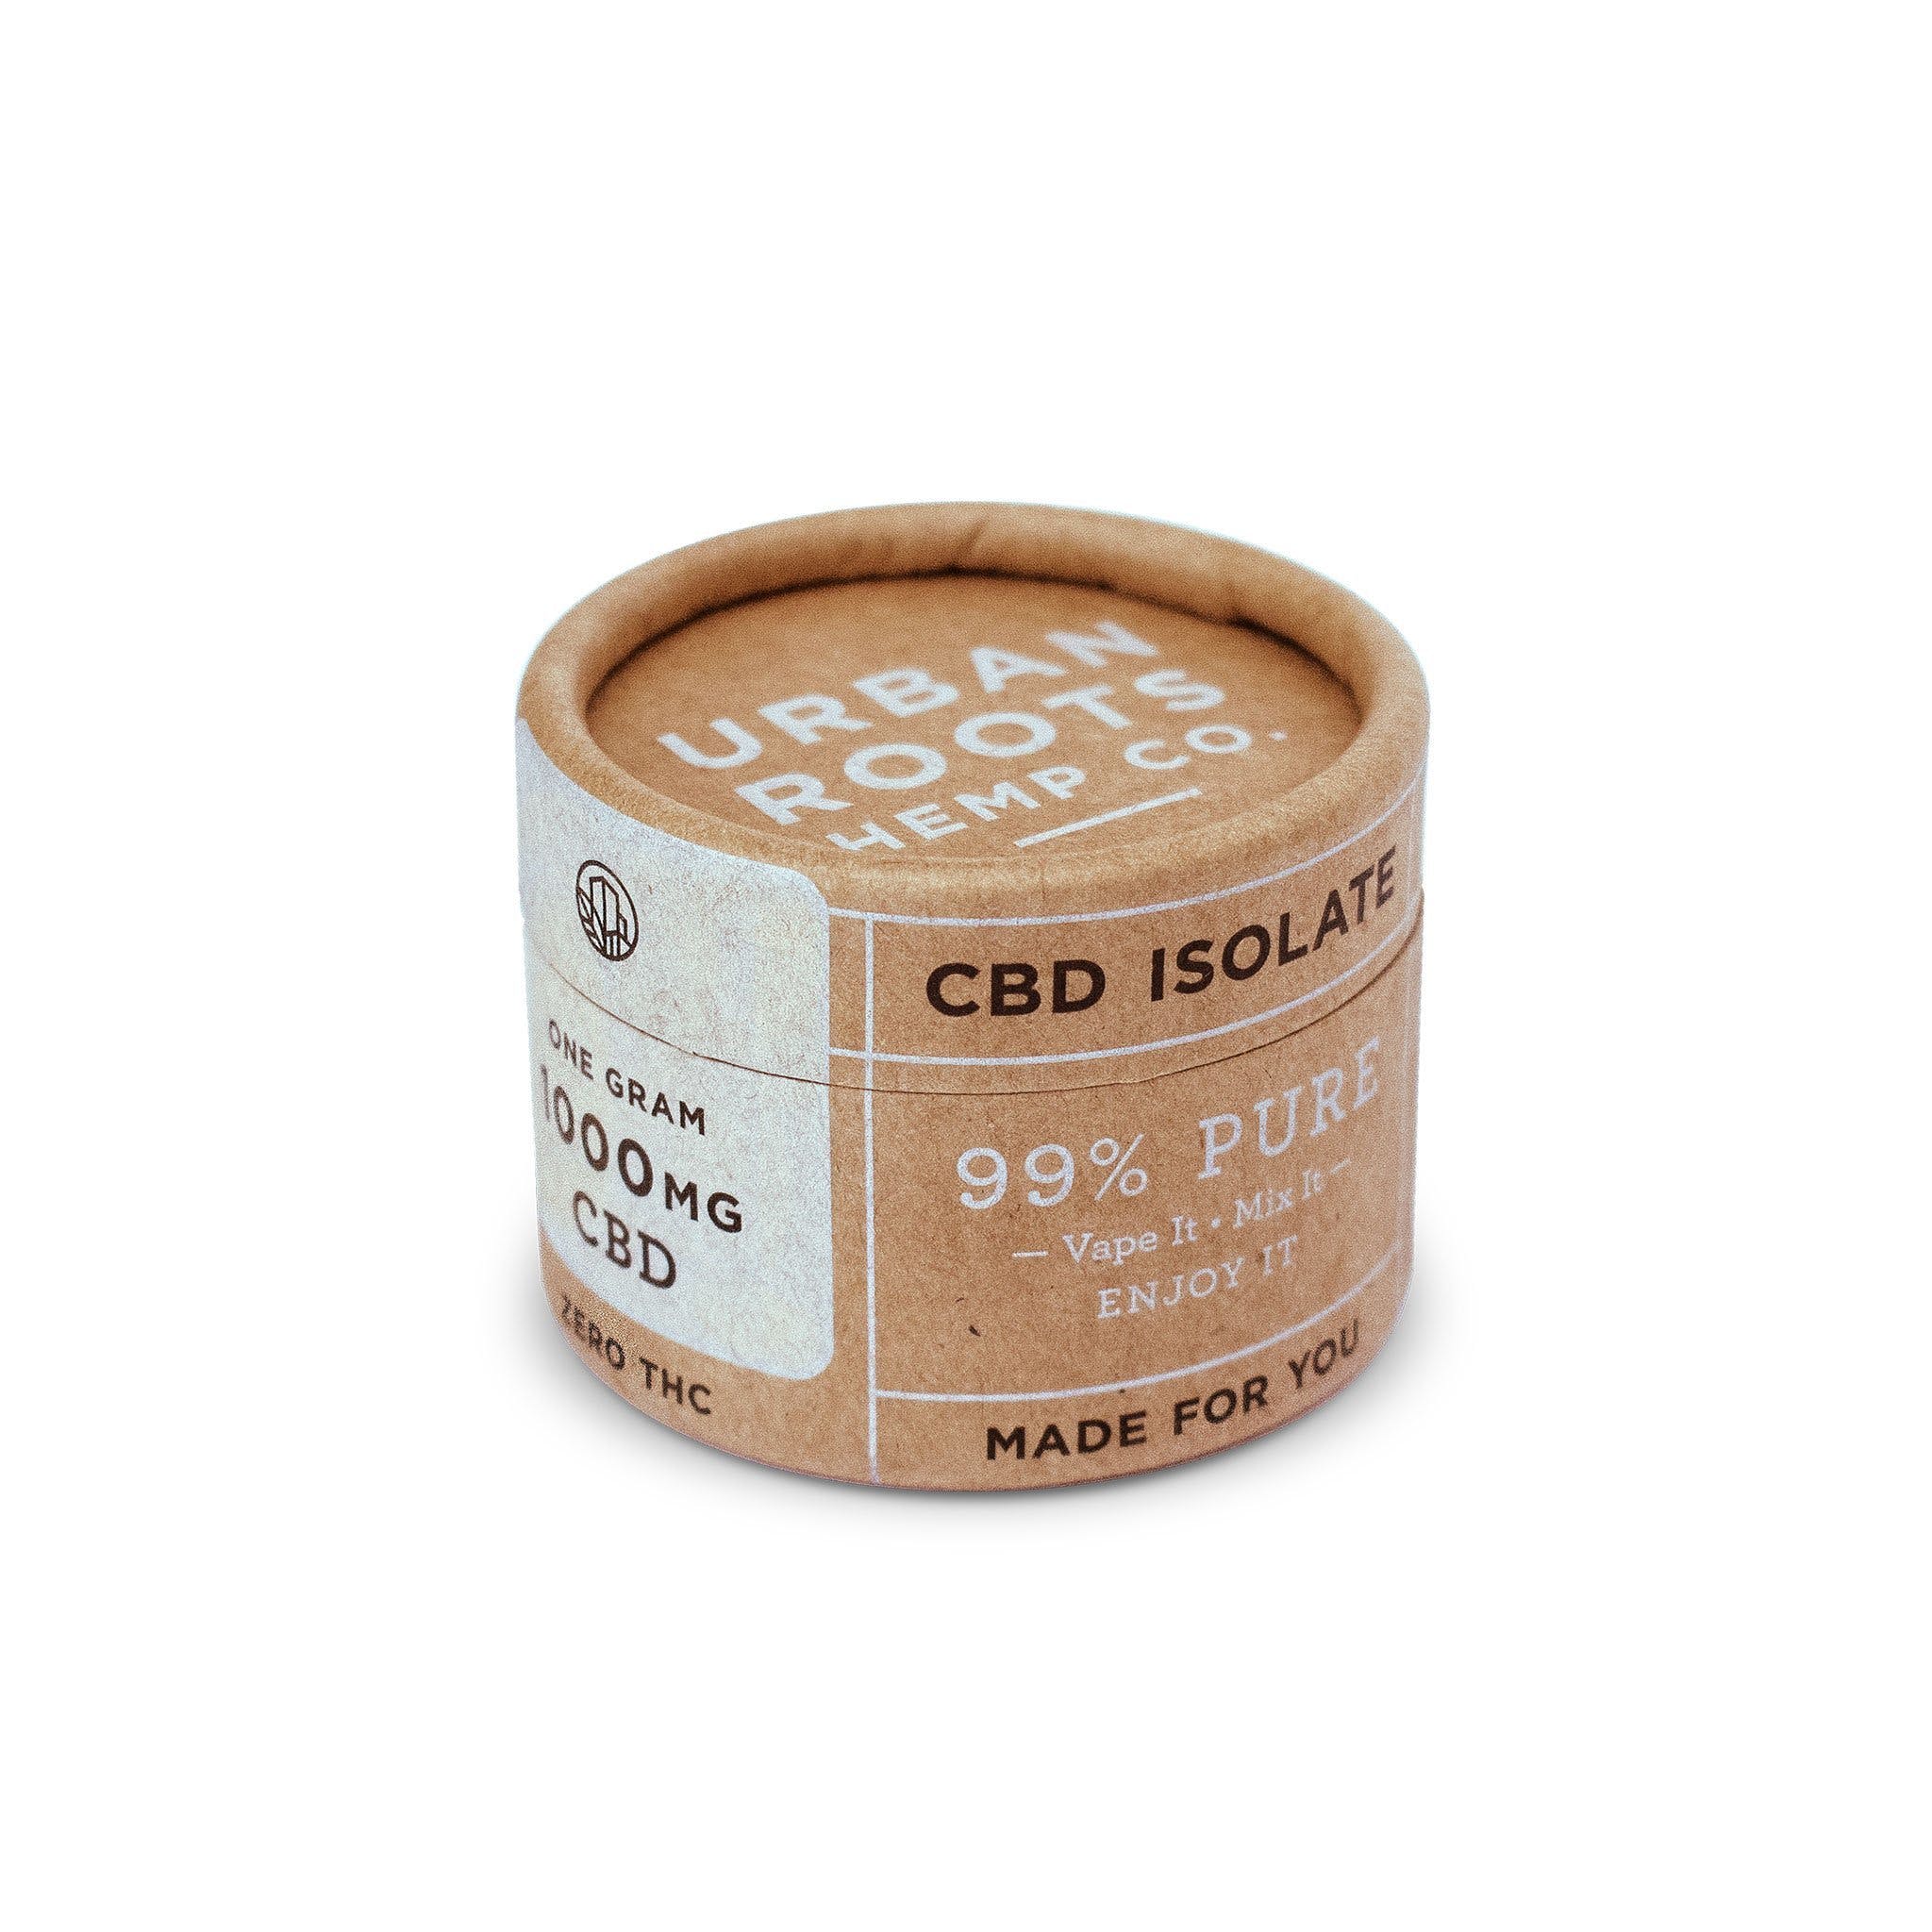 1000mg CBD Isolate by Urban Roots